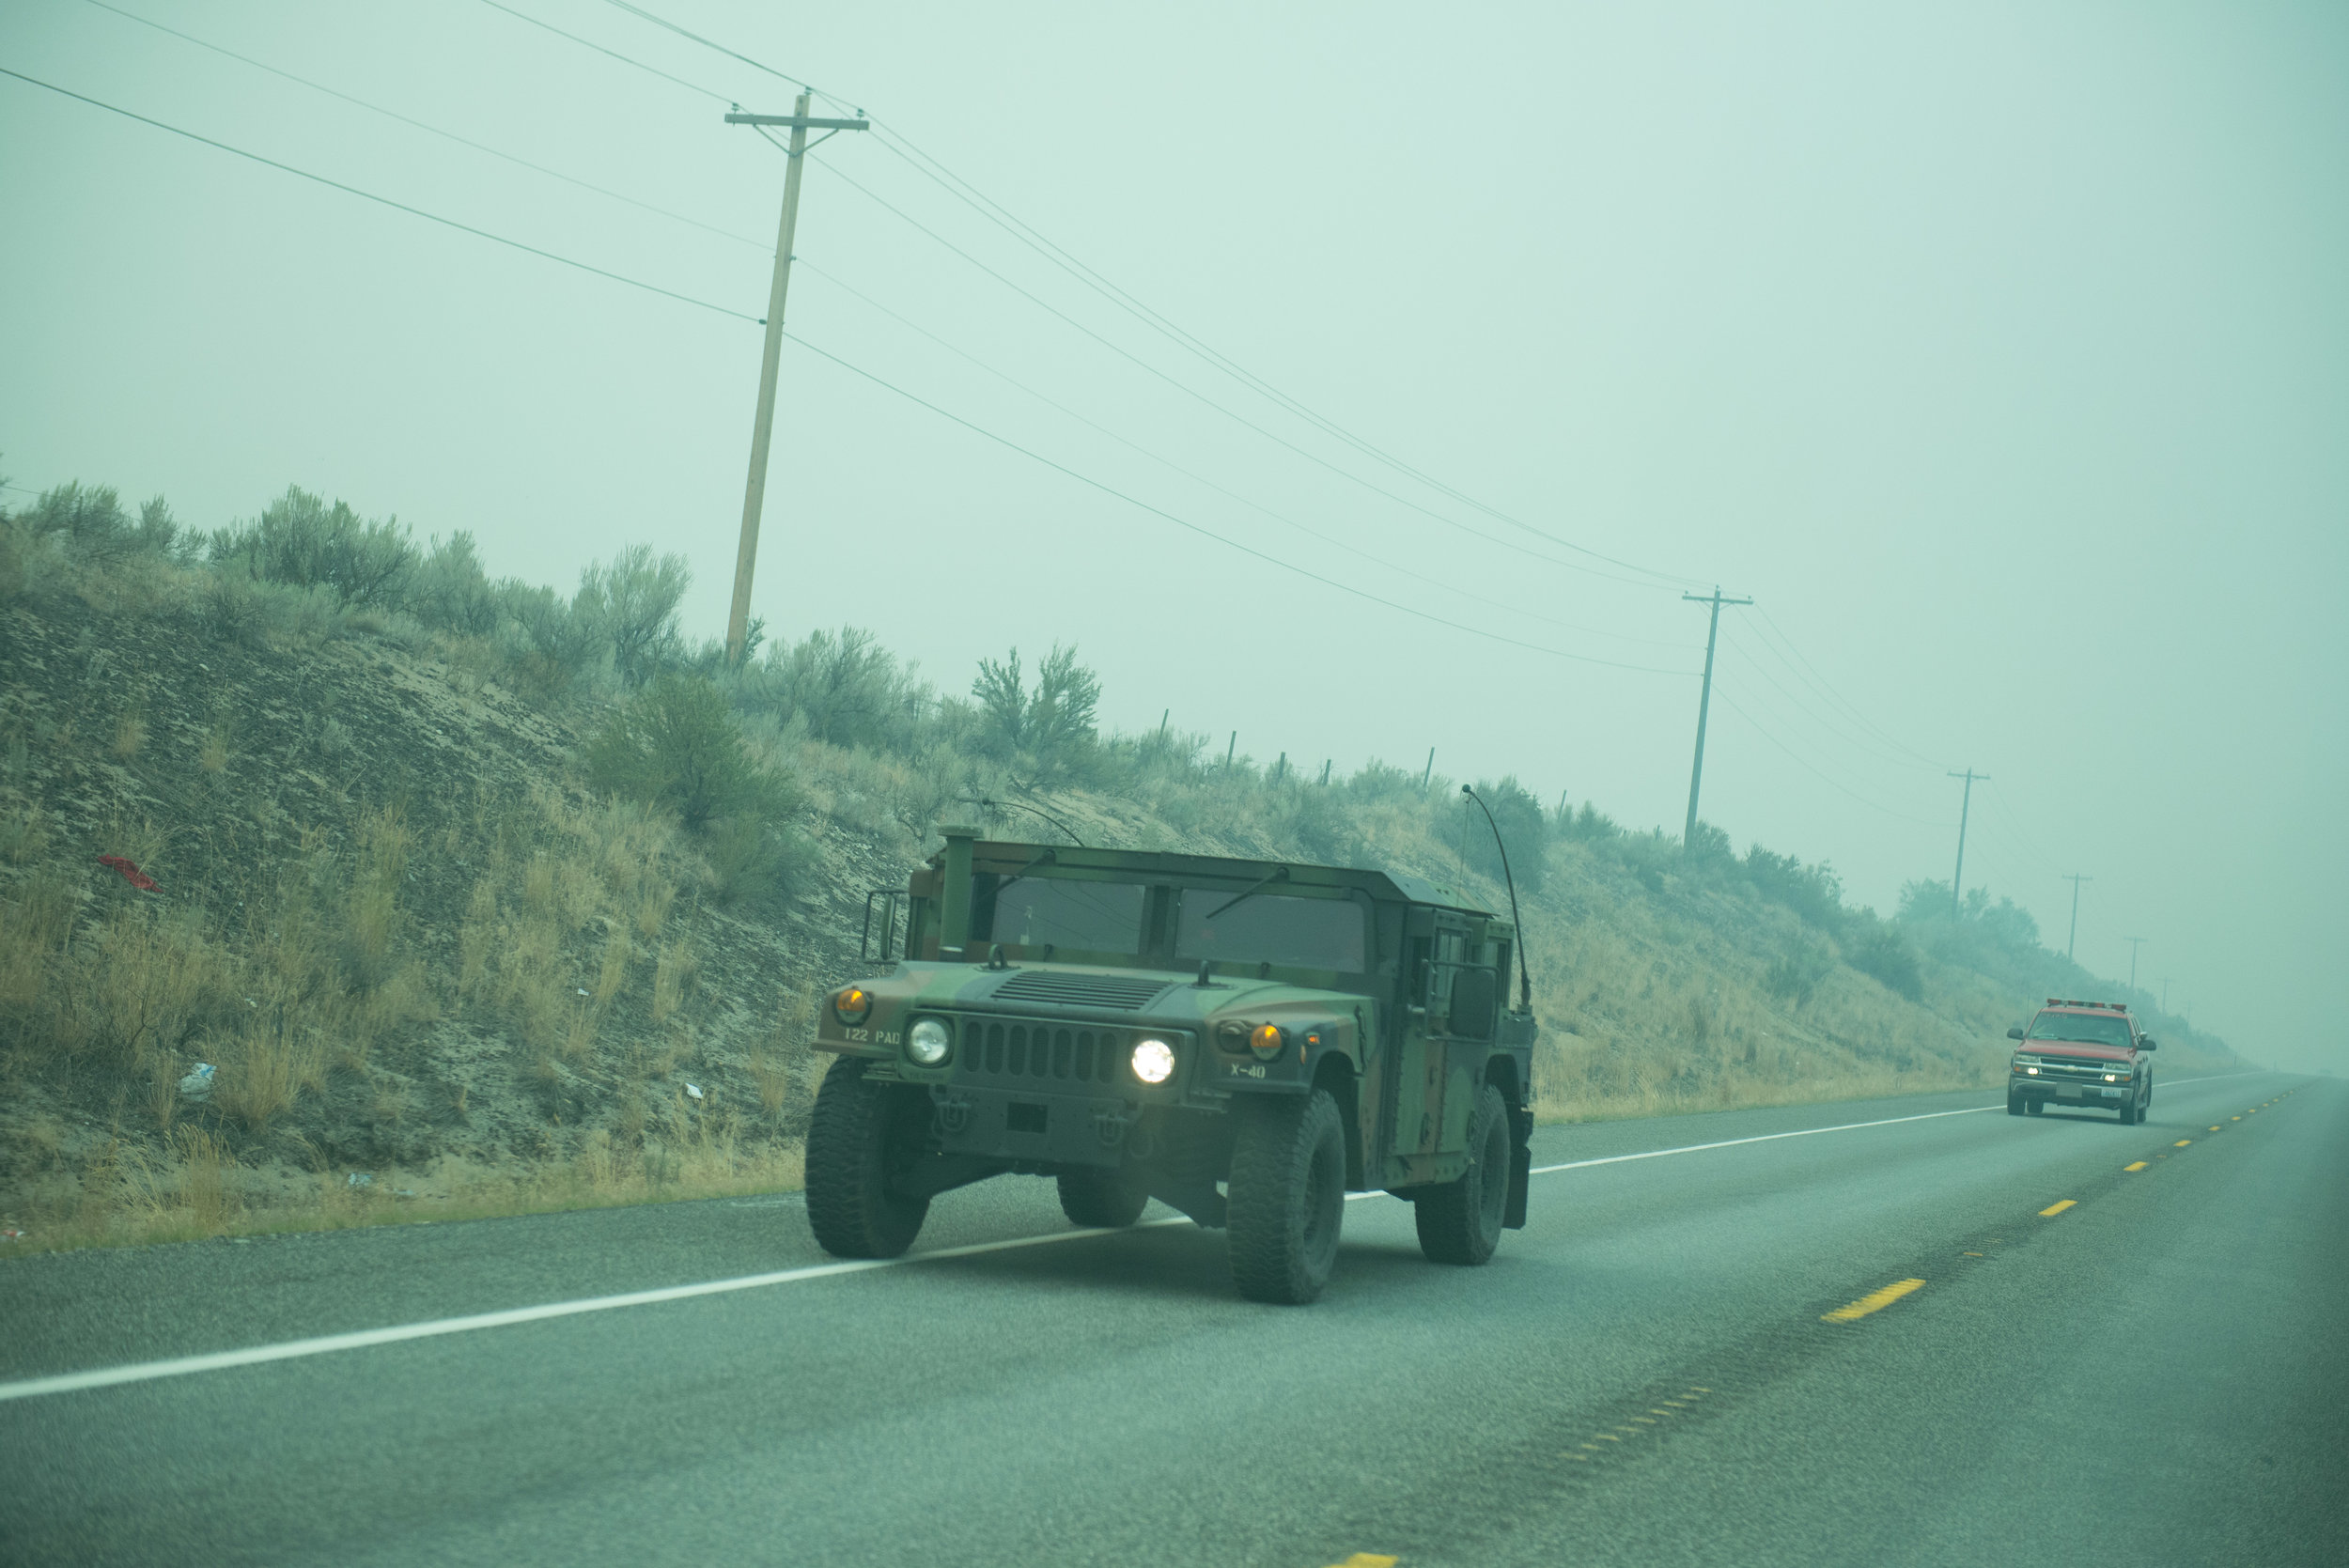  A US National Guard Humvee leaves the Incident Command Post Omak with a Fire vehicle following behind Monday August 24, 2015. Members of the US National Guard from Joint Base Lewis McChord were called in to support fire-fighting efforts in Okanogan 